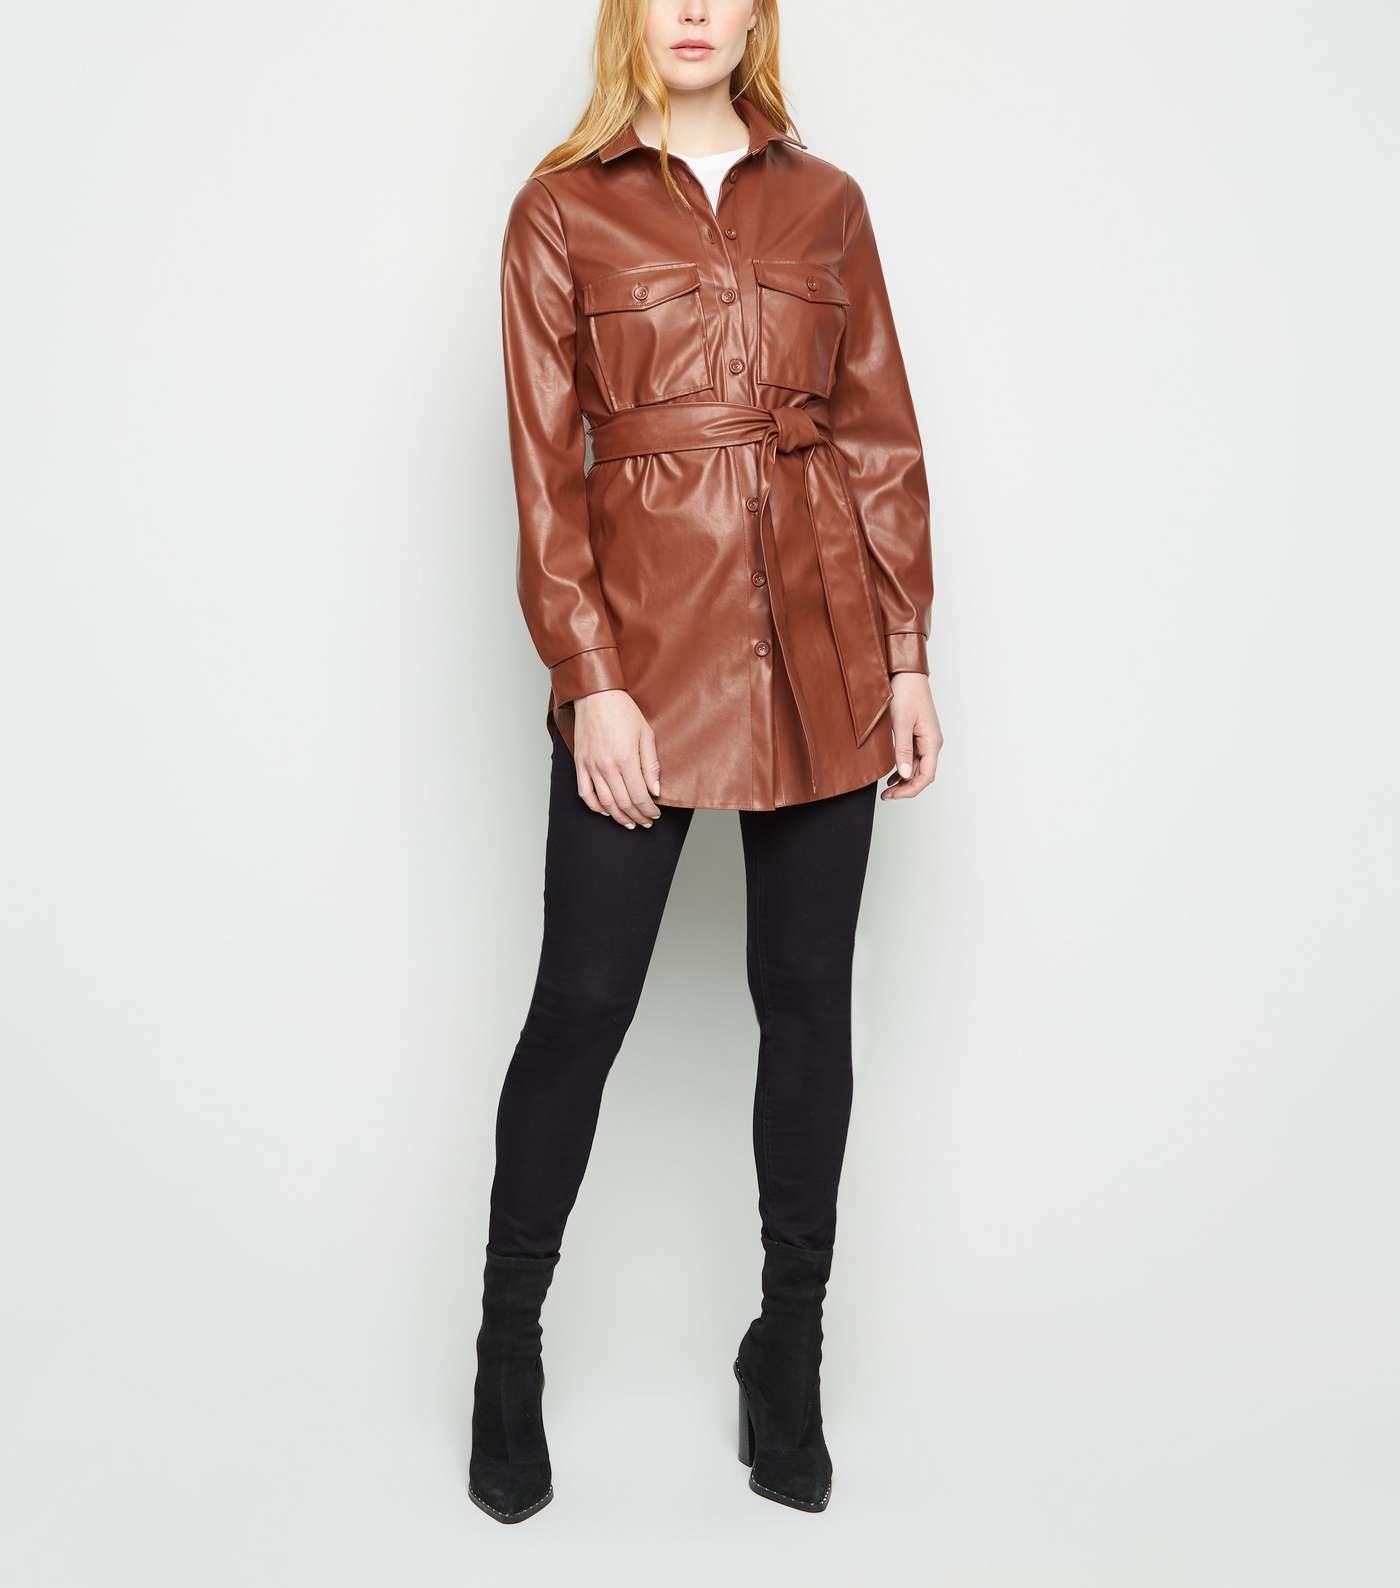 Tan Leather-Look Belted Shirt Image 2